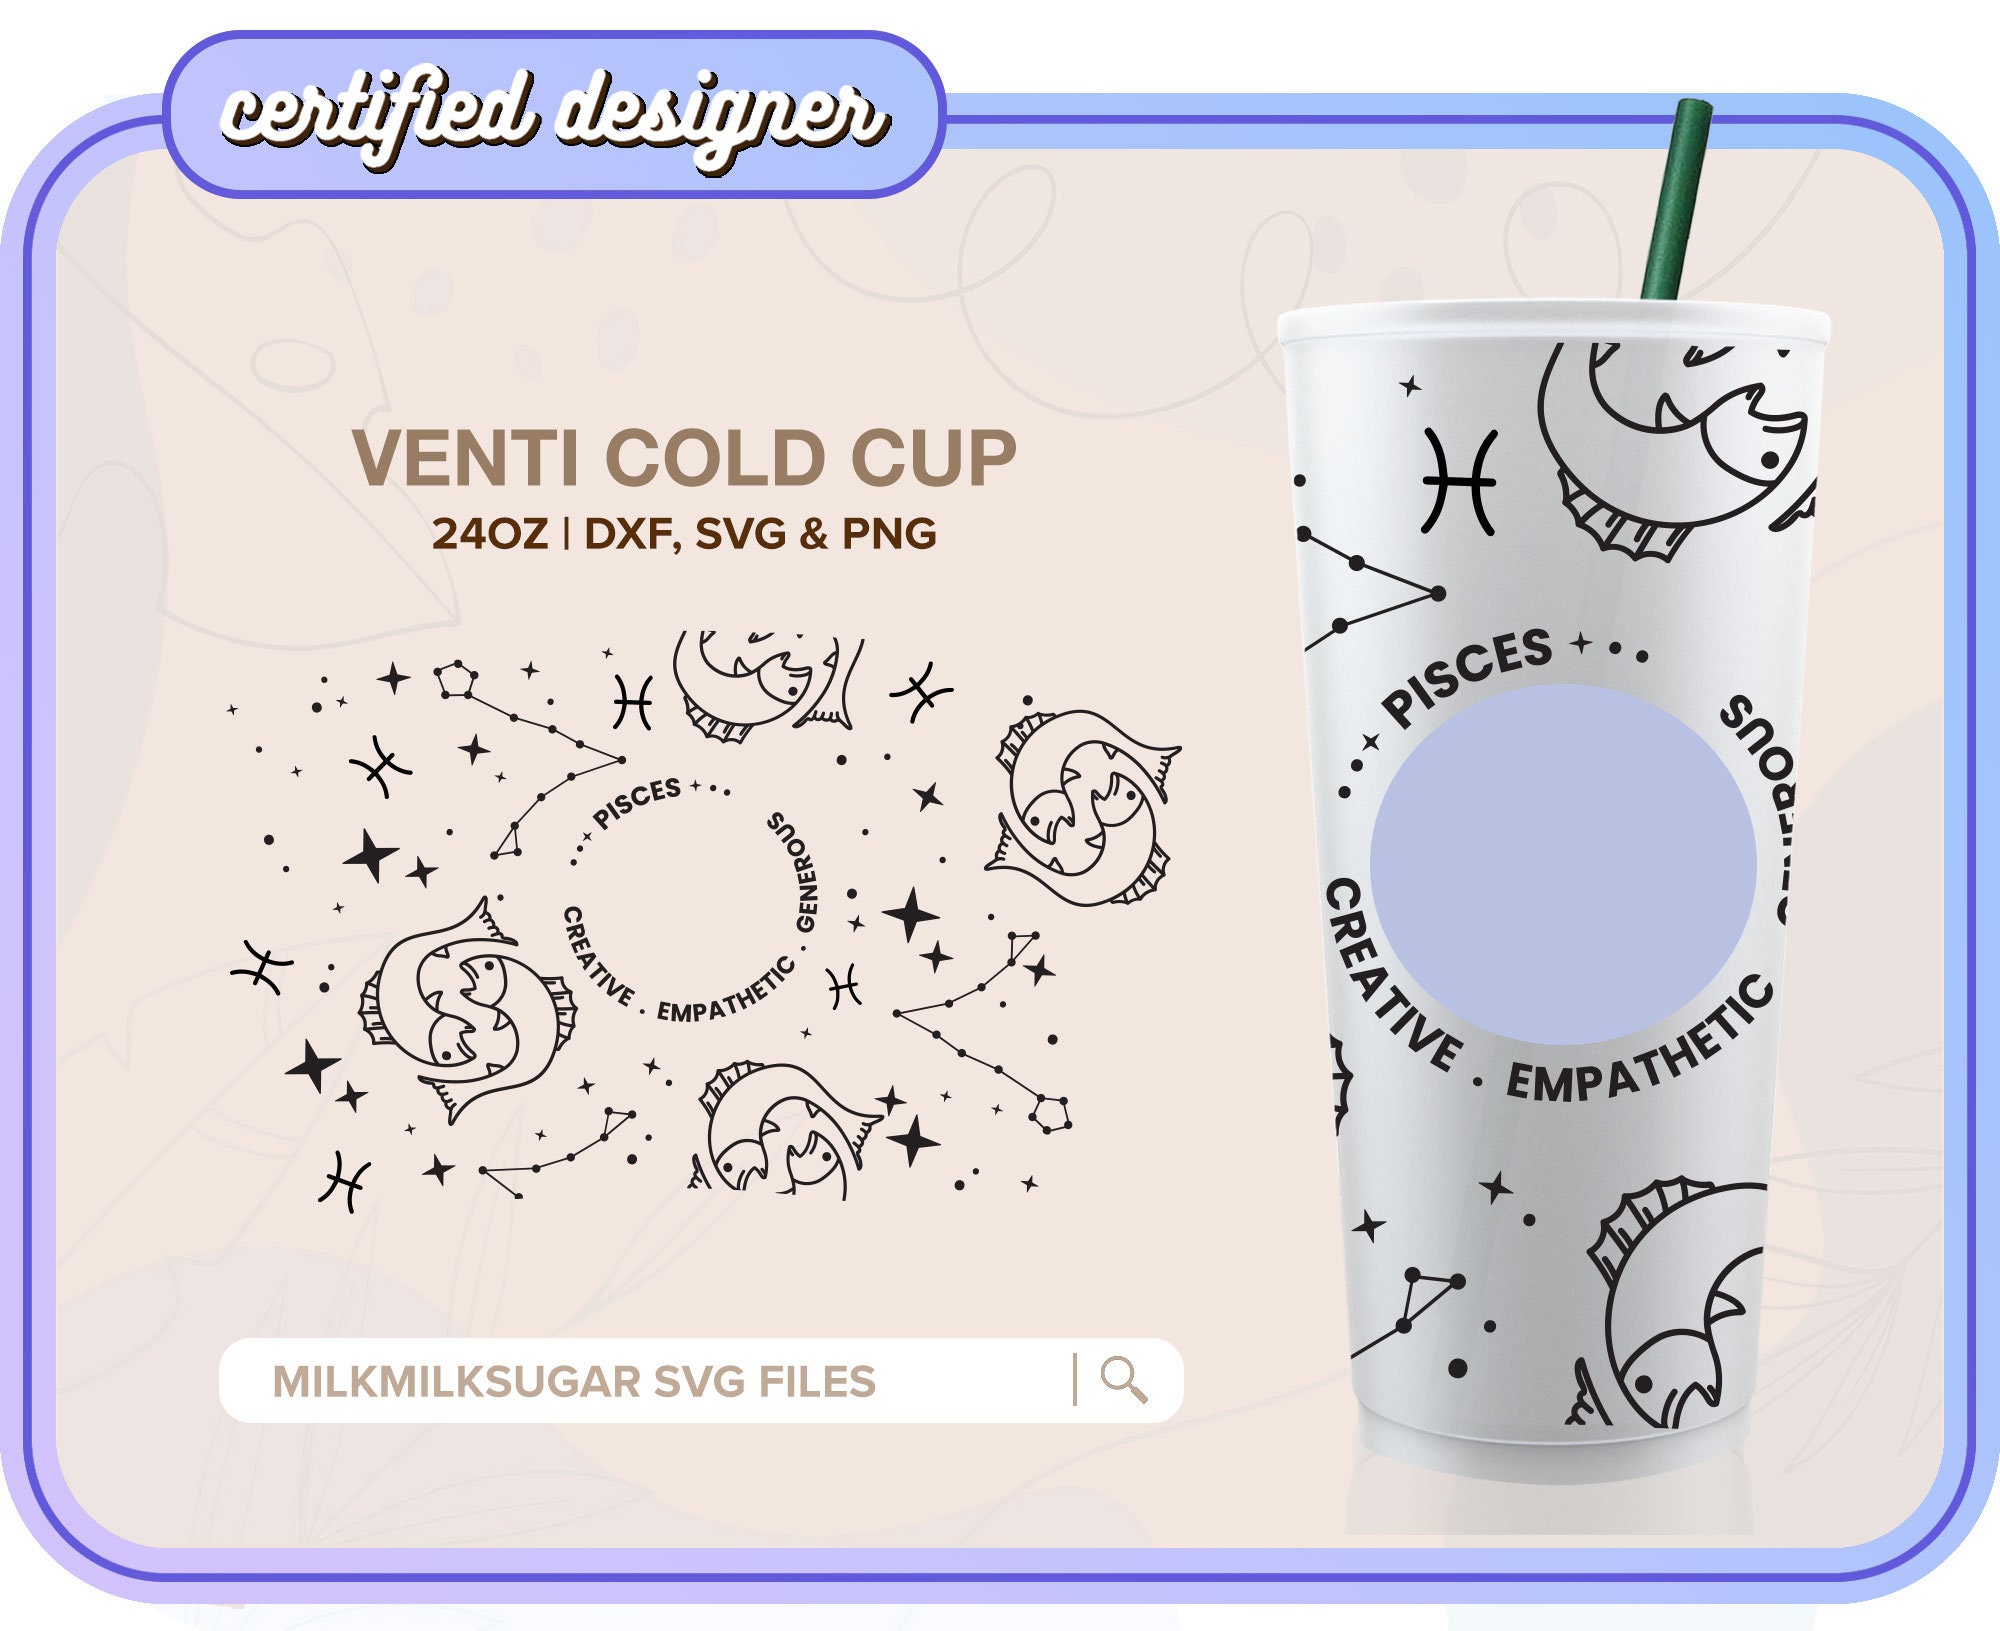 Detroit Lions Full Wrap Template Svg, Cup Wrap Coffee 12 - Inspire Uplift